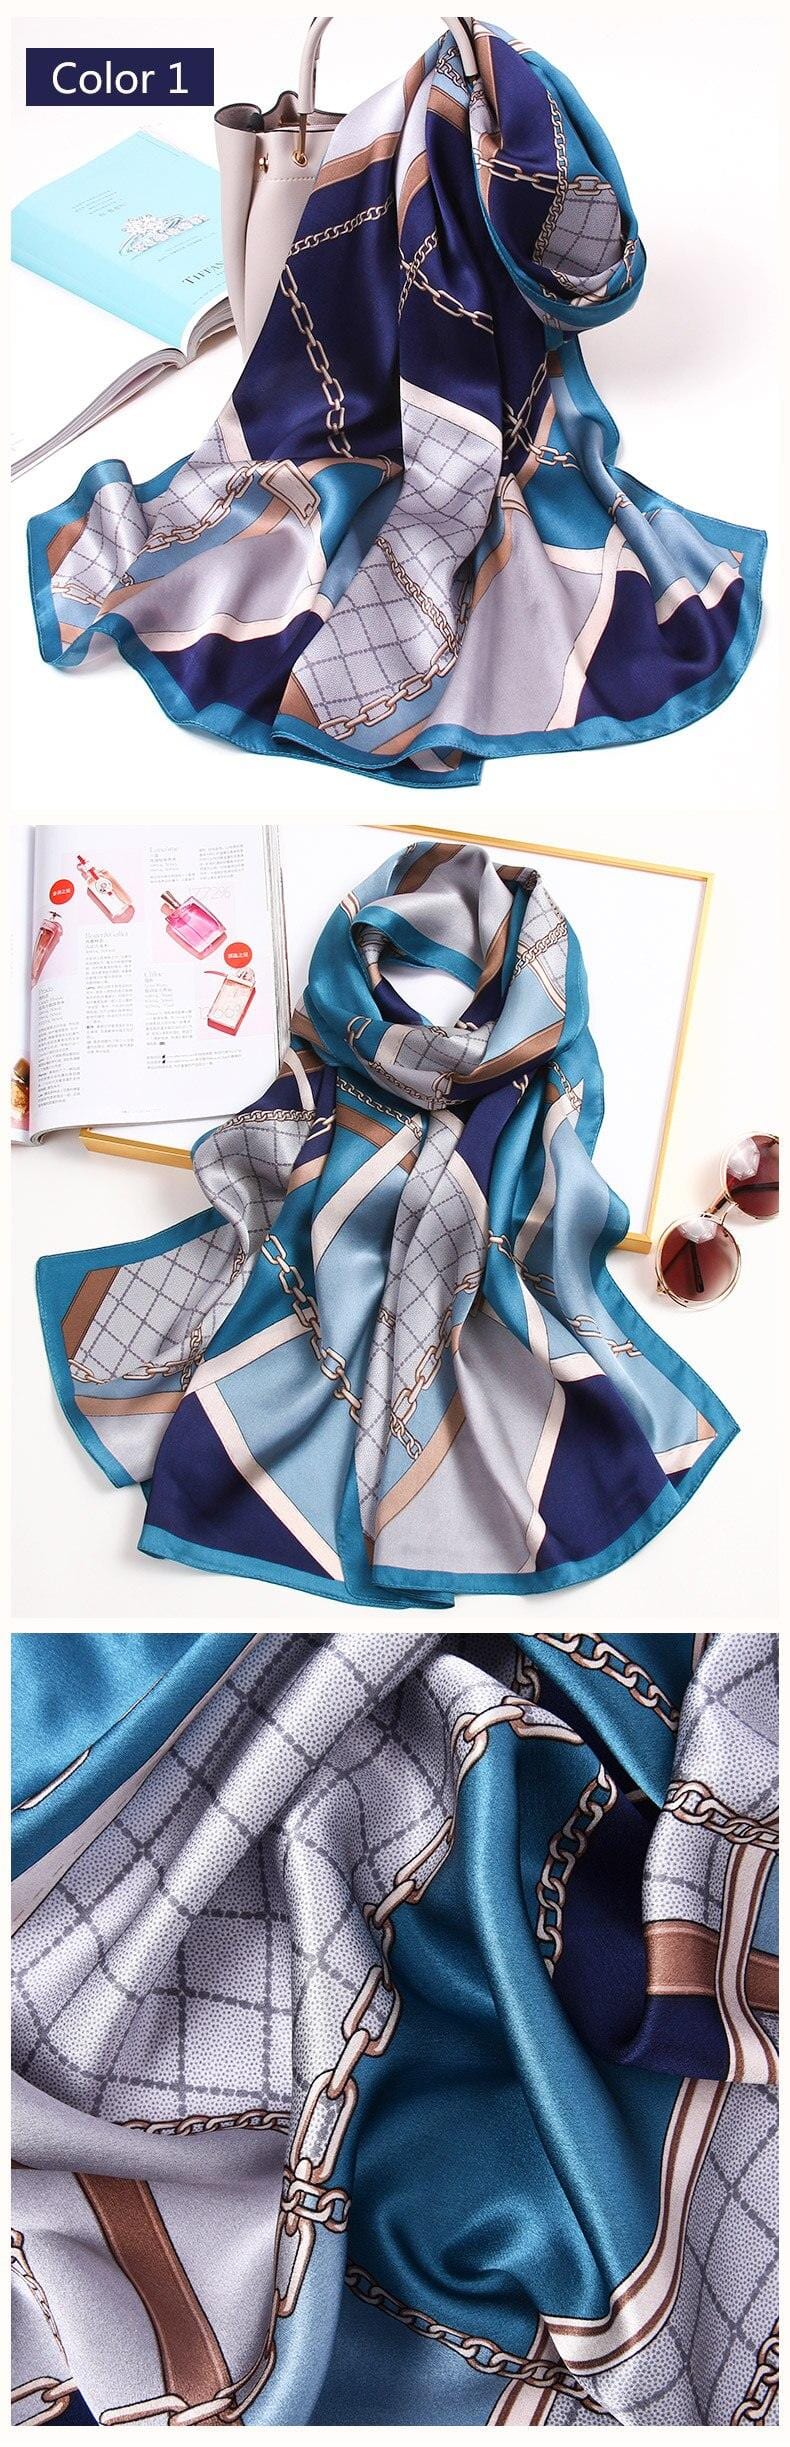 Long Rectangle Silk Scarves - 170x53 cm (approx. 67 x 21 inches) - Premium Accessories - Scarves - Shop now at San Rocco Italia